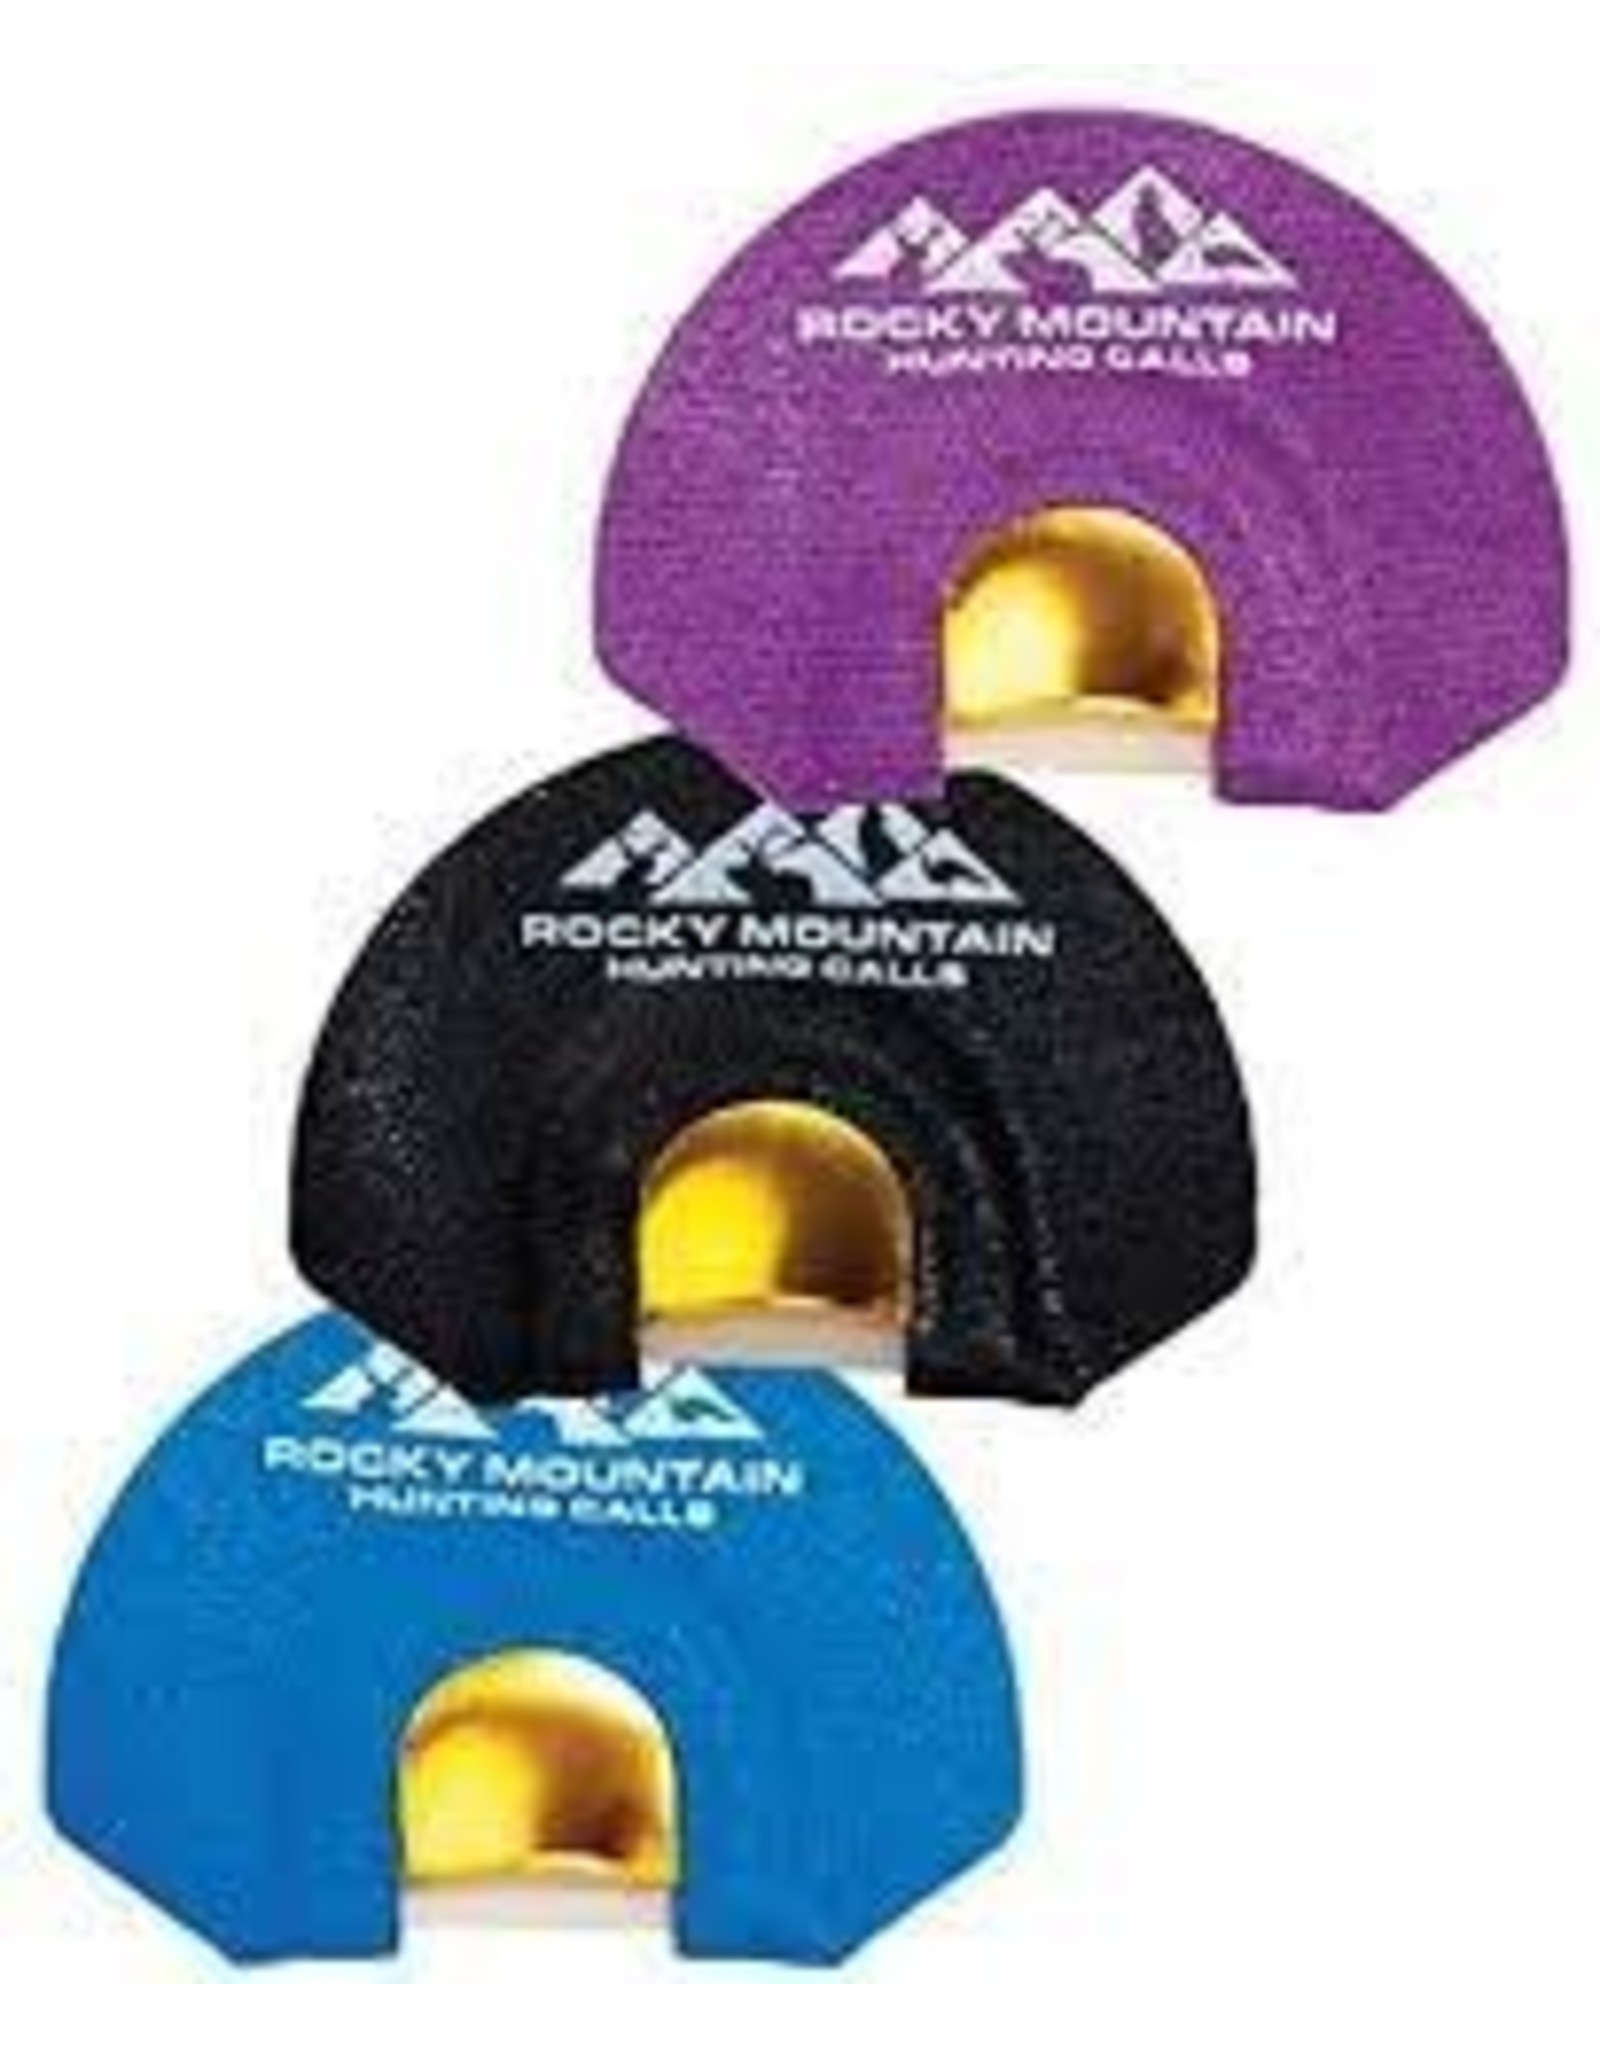 ROCKY MOUNTAIN HUNTING CALLS RMHC "GTP" ELK DIAPHRAGM MOUTH REED 3PK